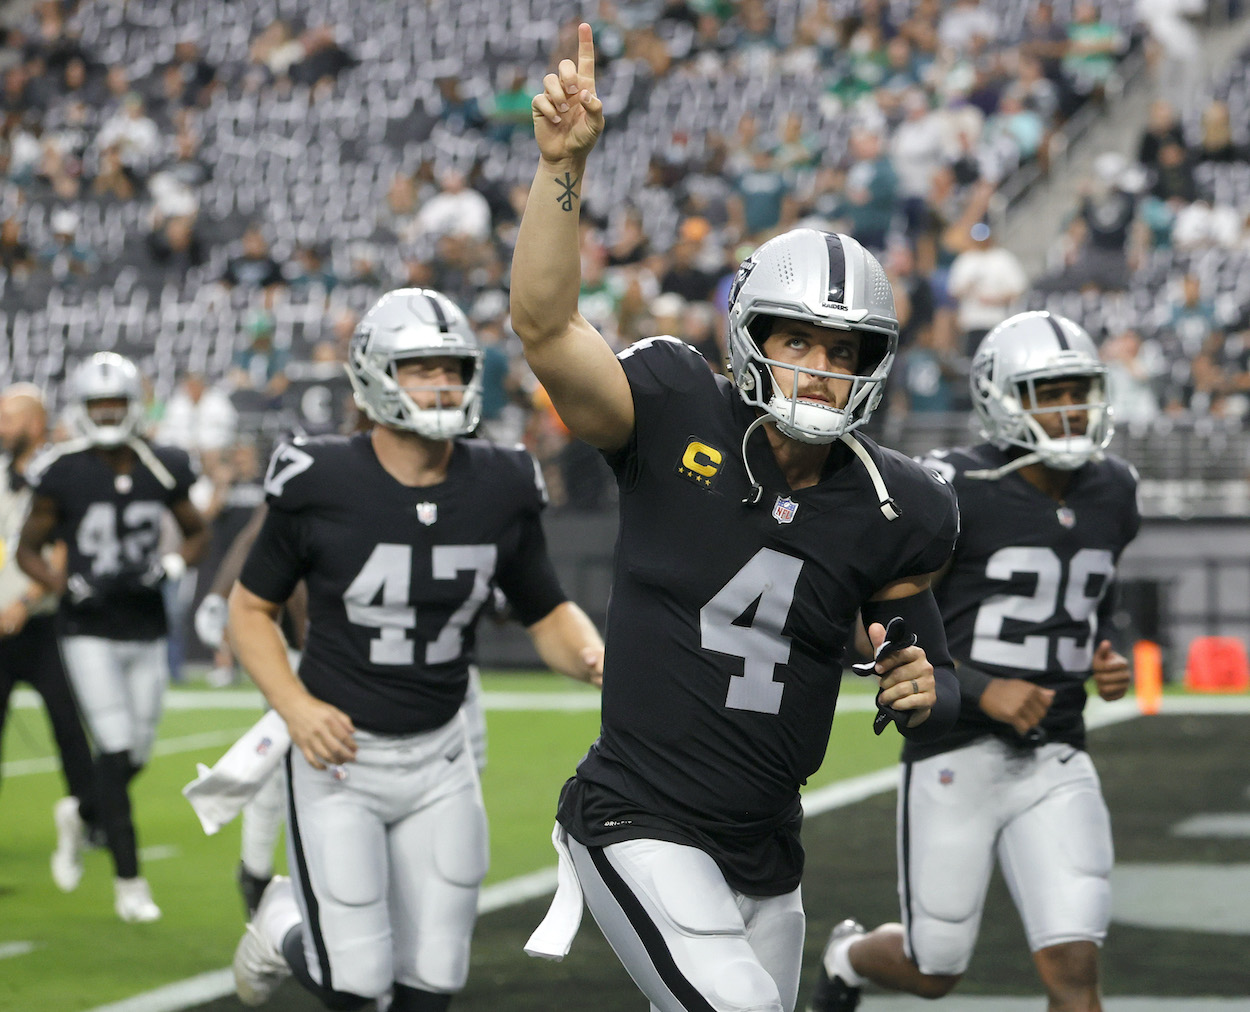 Quarterback Derek Carr of the Las Vegas Raiders, who delivered a blunt message to teammates after the Jon Gruden scandal, gestures as he leaves the field with teammates Trent Sieg and Casey Hayward Jr. after warmups before a game against the Philadelphia Eagles at Allegiant Stadium on October 24, 2021 in Las Vegas, Nevada. The Raiders defeated the Eagles 33-22.